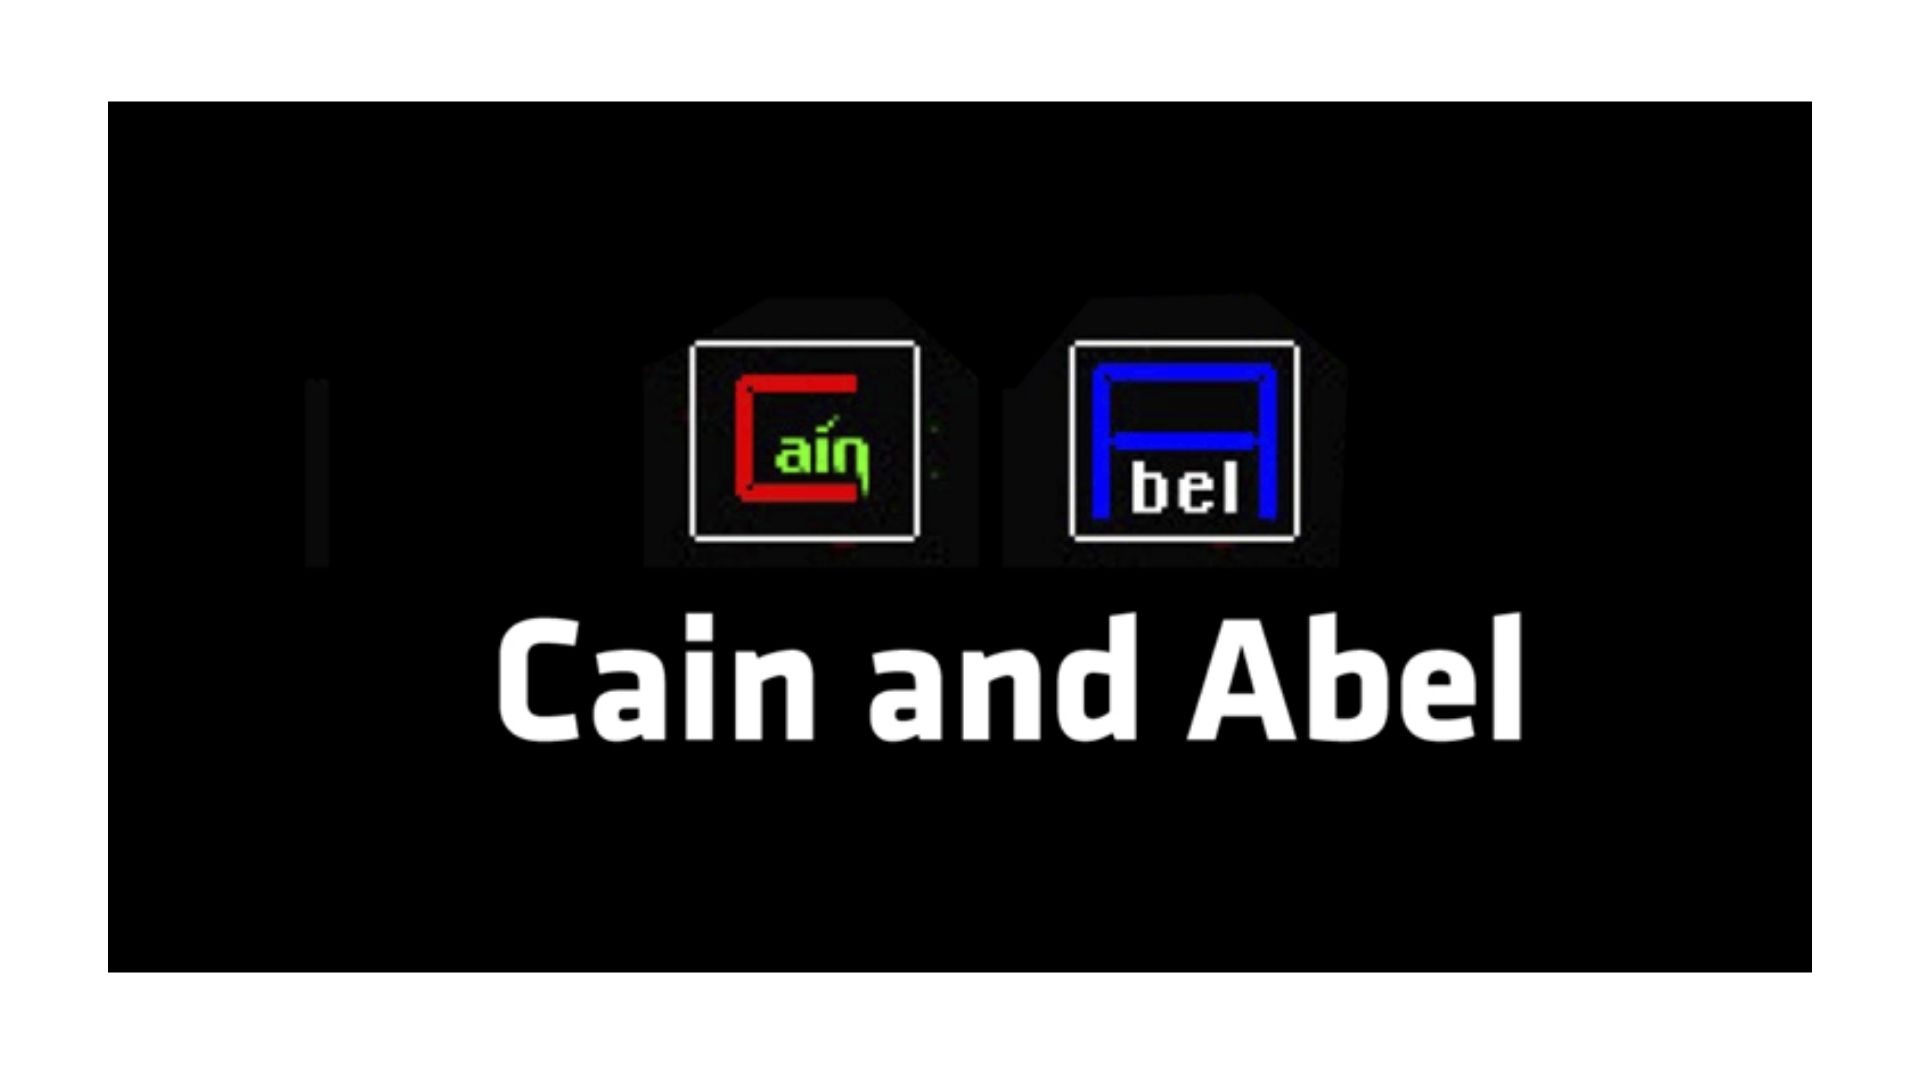 cain and abel download windows 7